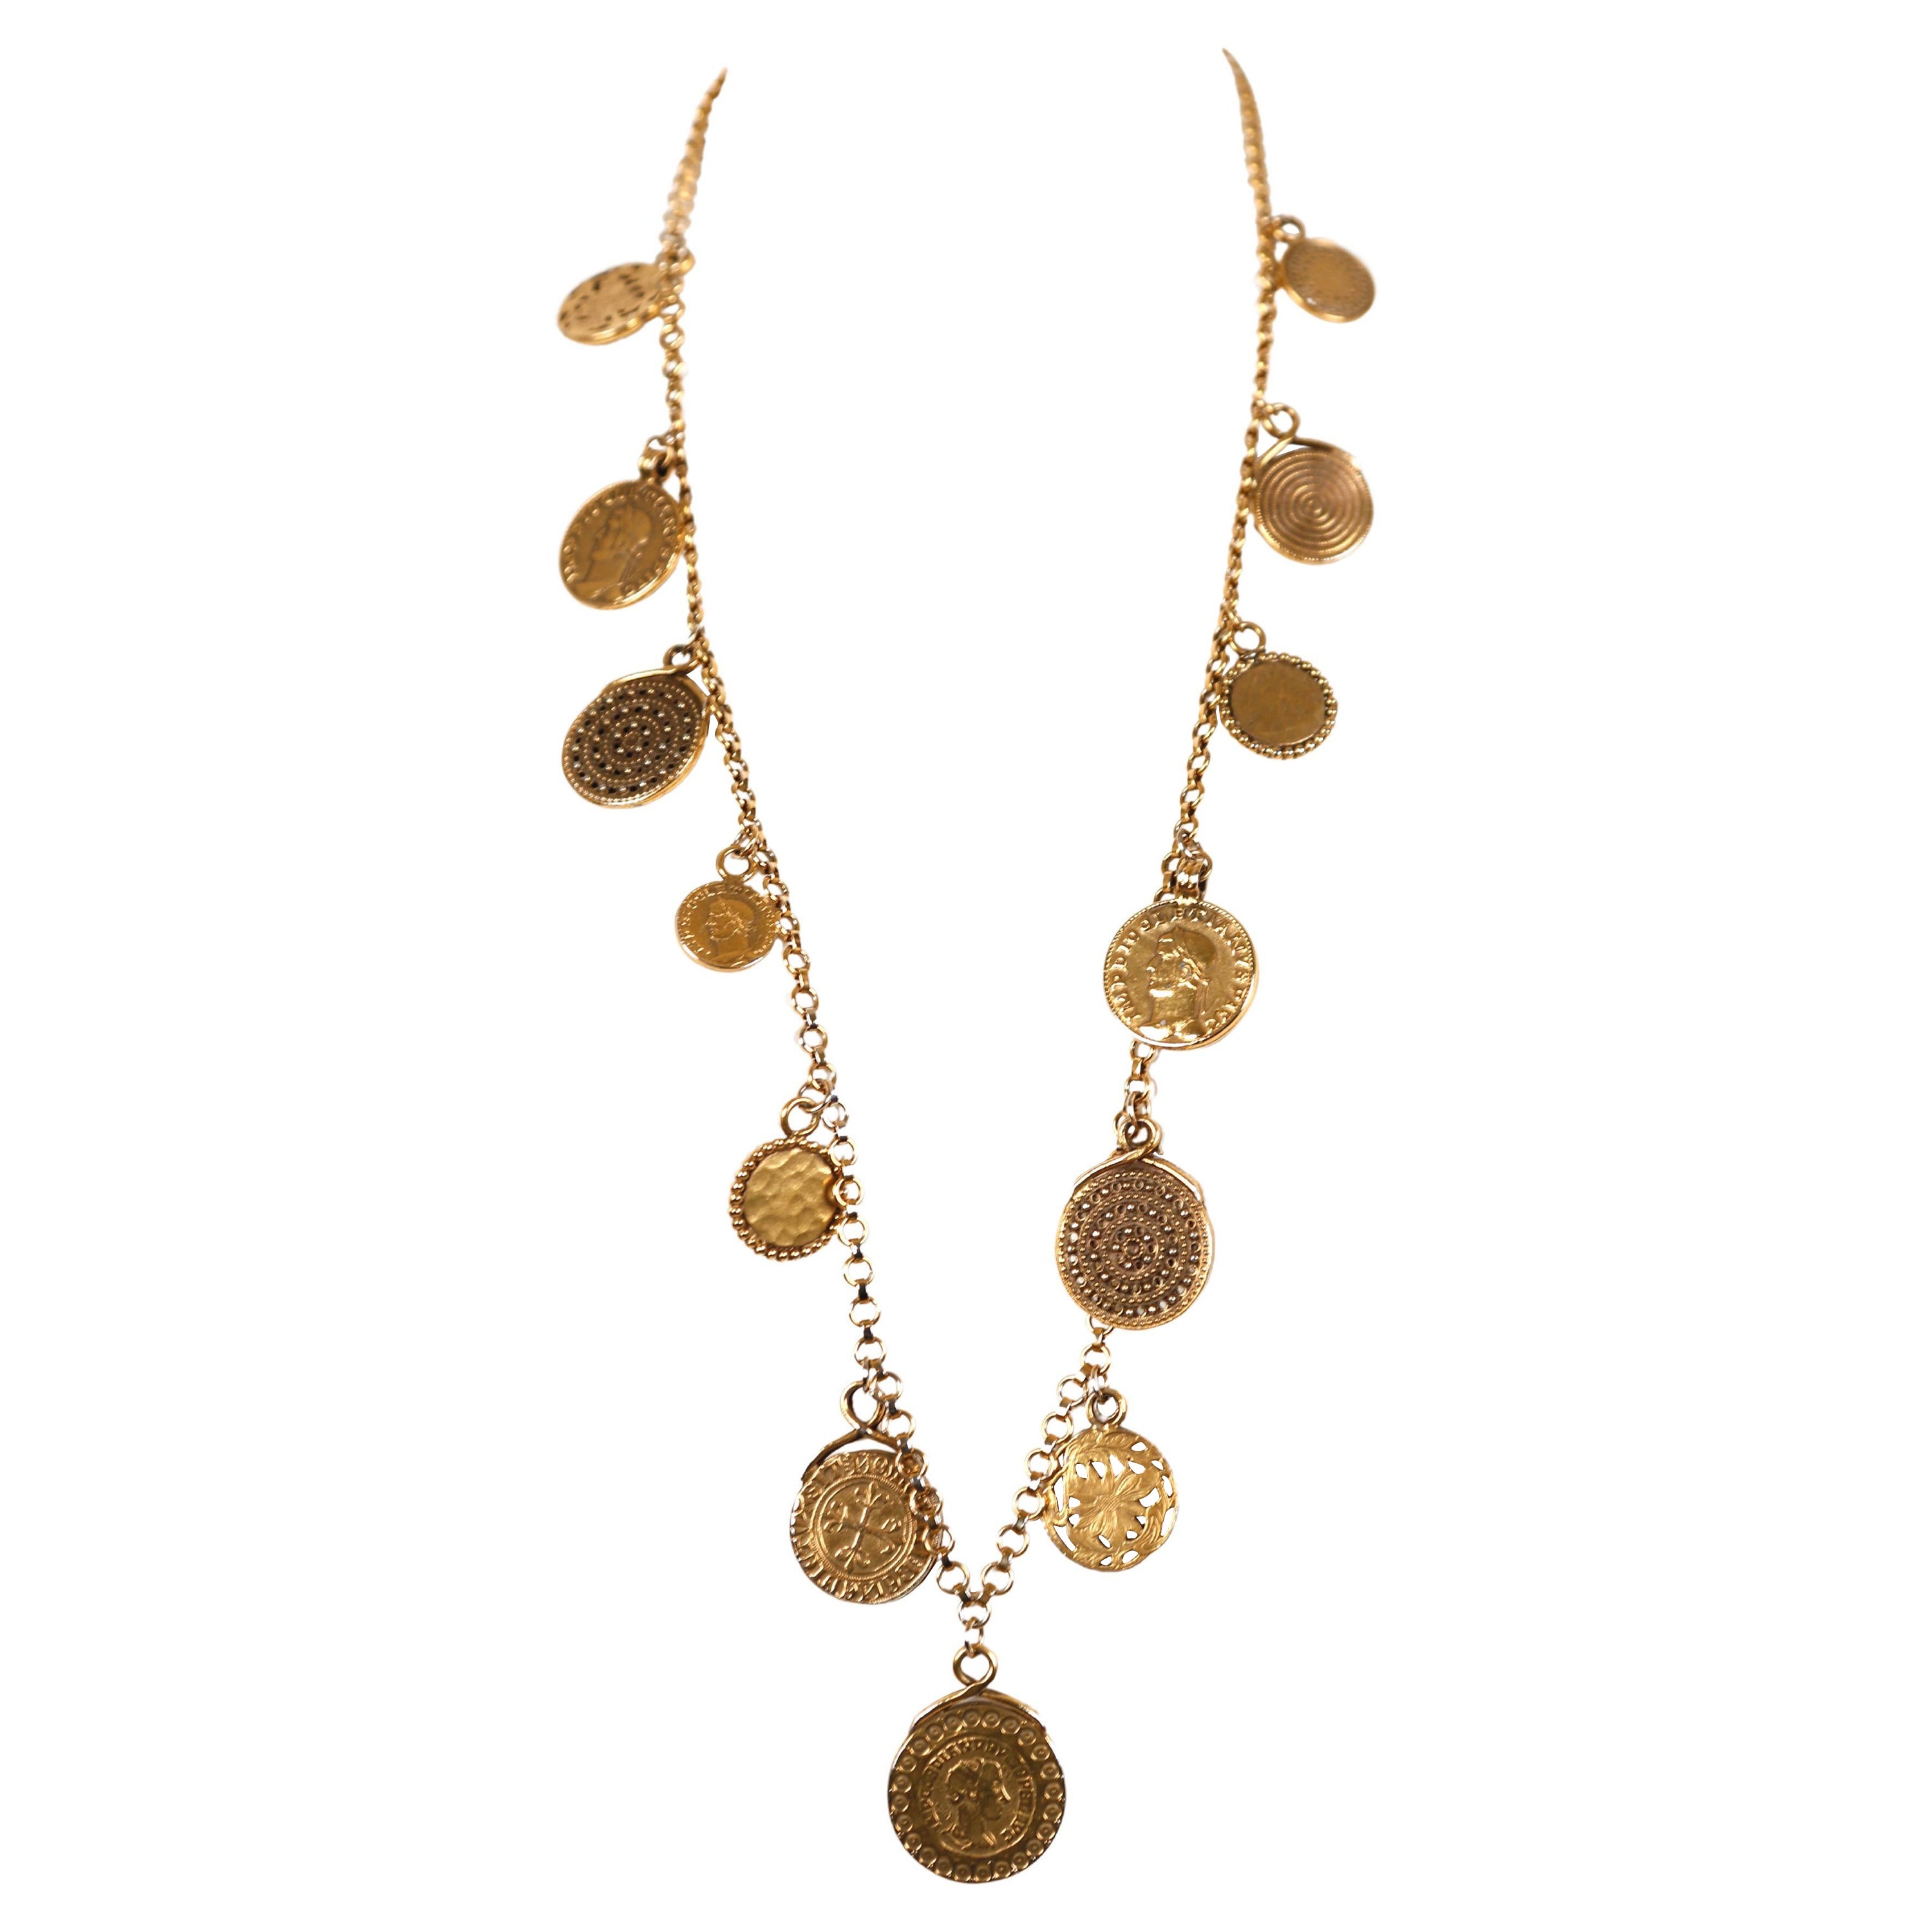 Very rare, Roman coin necklace in antique gold-tone, designed by Yves Saint Laurent dating to spring of 1977  Necklace is approximately 32